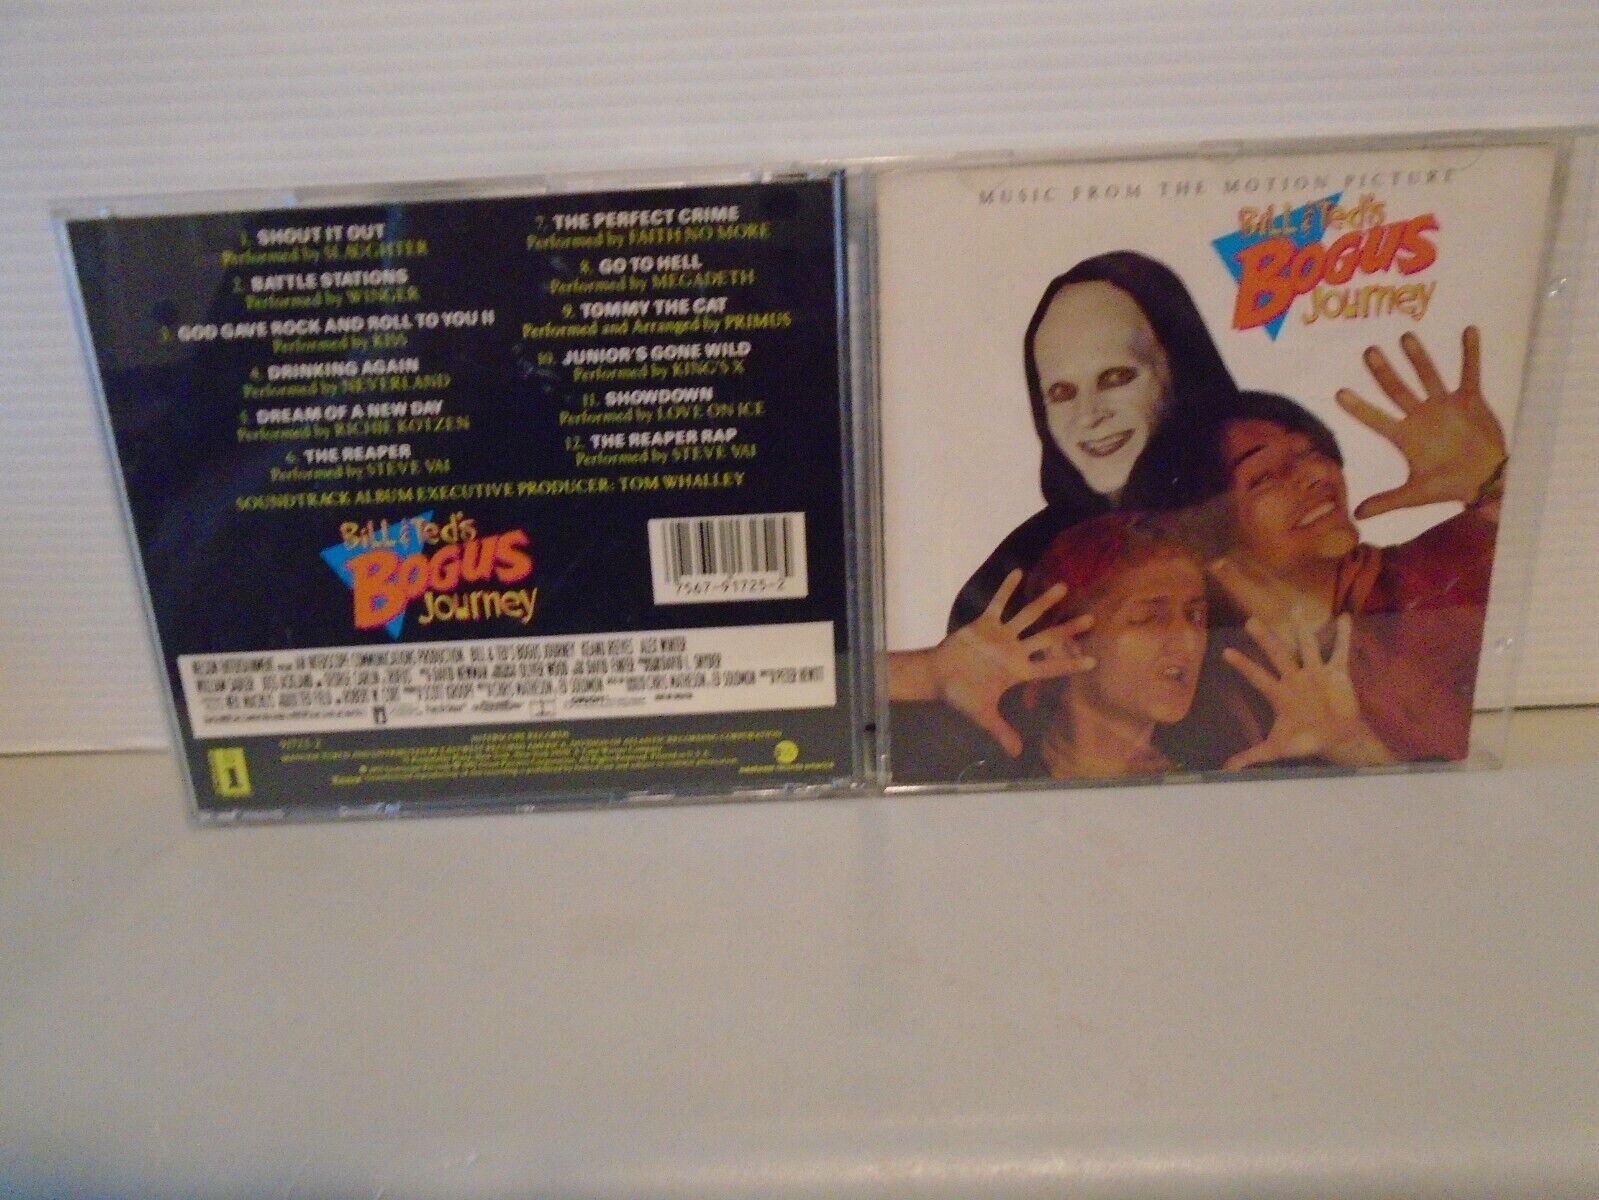 BILL & TED'S BOGUS JOURNEY--CD--1991 East/West-Faith No More, King's X, Kiss